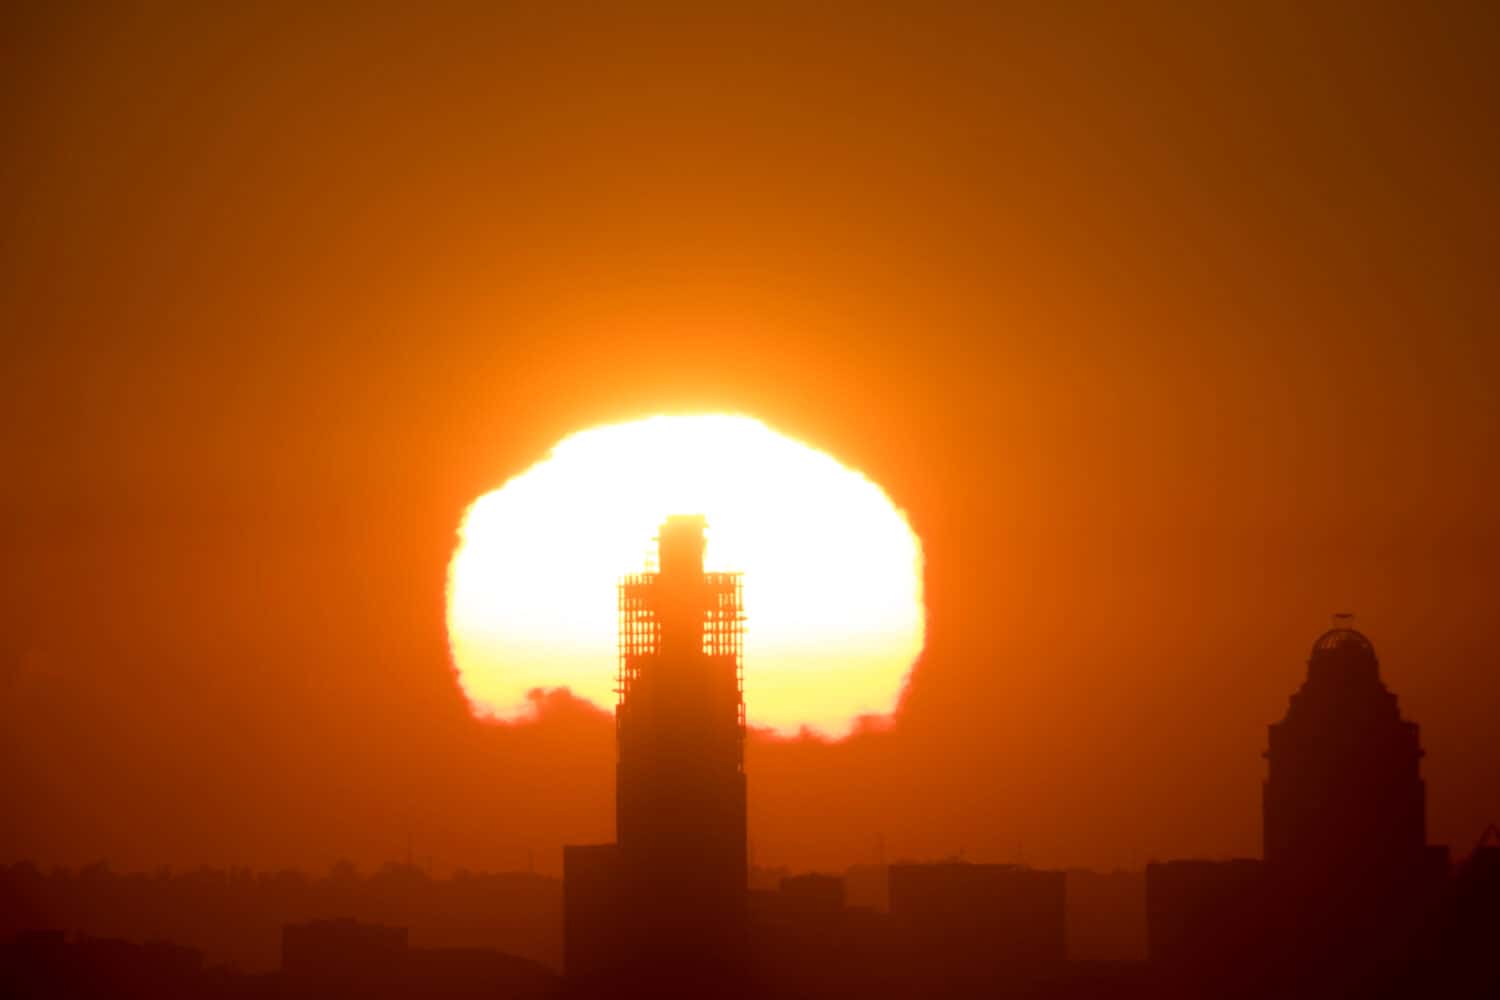 Sunrise behind The Leonardo Building while still under construction in Sandton, Johannesburg in South Africa 